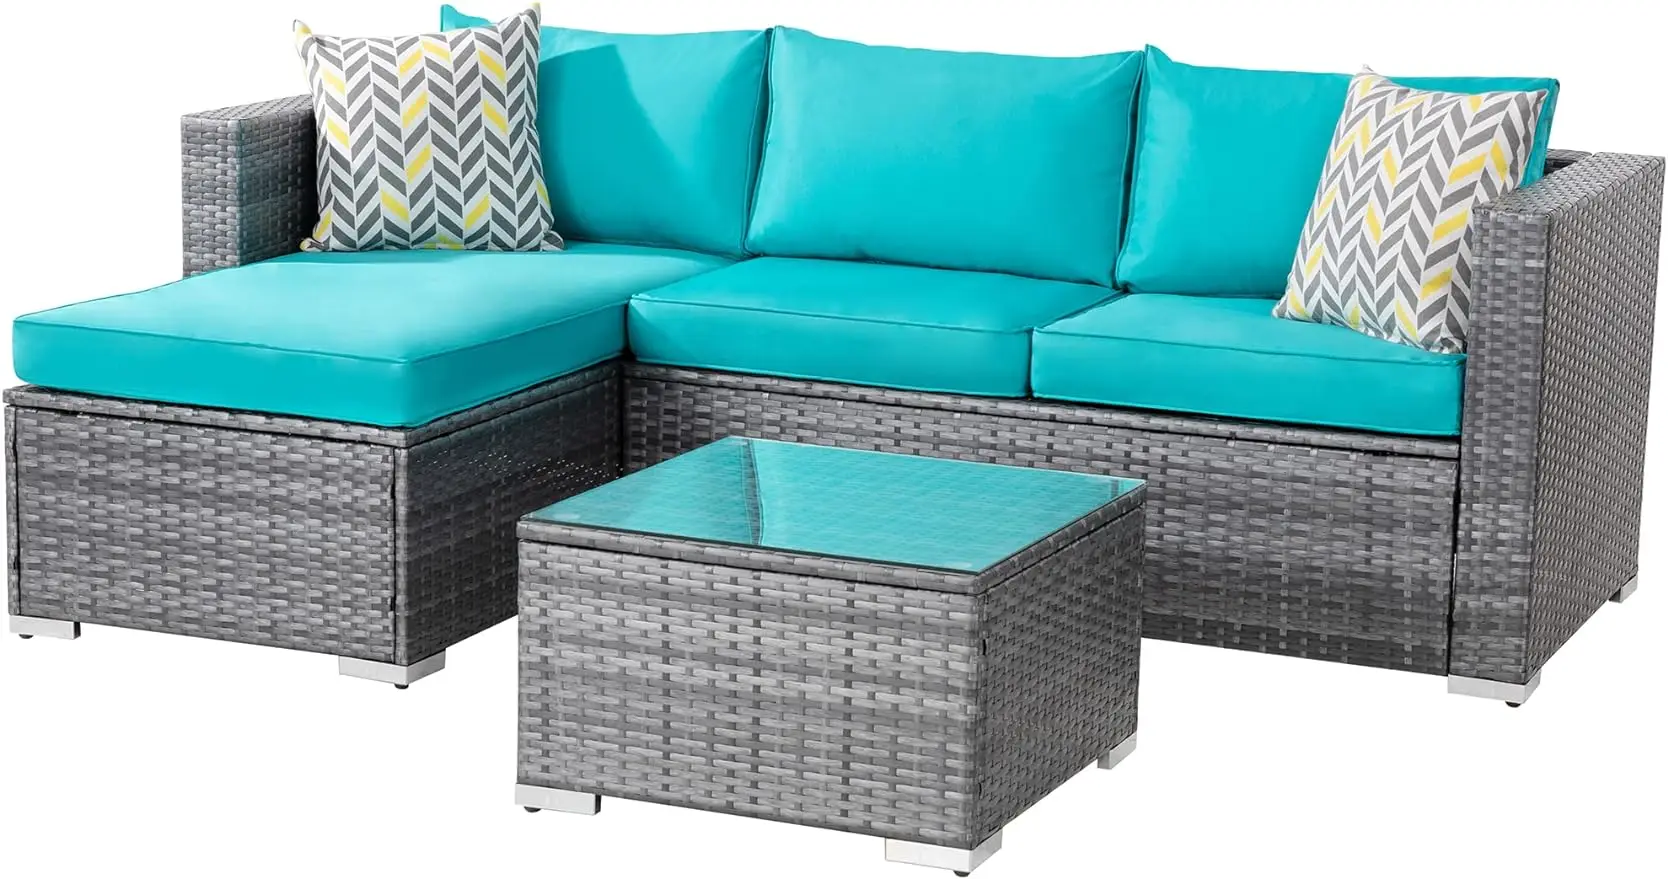 

Shintenchi Patio Furniture Sets 3 Pieces Outdoor Sectional Sofa Silver All-Weather Rattan Wicker Sofa Small Patio(Sky Blue)